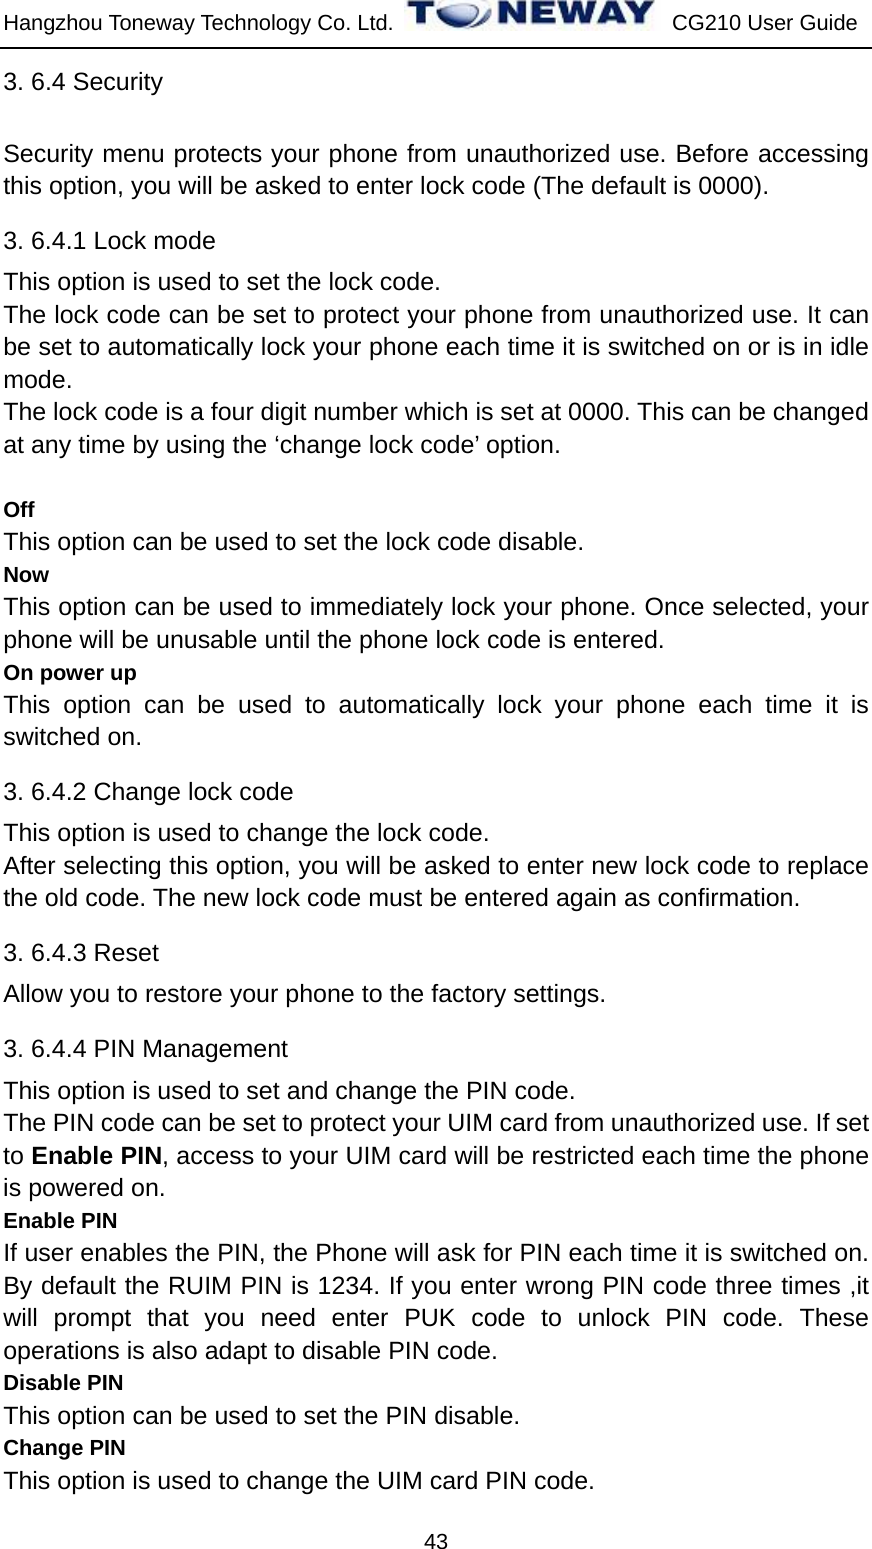 Hangzhou Toneway Technology Co. Ltd.    CG210 User Guide 43 3. 6.4 Security     Security menu protects your phone from unauthorized use. Before accessing this option, you will be asked to enter lock code (The default is 0000). 3. 6.4.1 Lock mode This option is used to set the lock code. The lock code can be set to protect your phone from unauthorized use. It can be set to automatically lock your phone each time it is switched on or is in idle mode. The lock code is a four digit number which is set at 0000. This can be changed at any time by using the ‘change lock code’ option.  Off This option can be used to set the lock code disable. Now This option can be used to immediately lock your phone. Once selected, your phone will be unusable until the phone lock code is entered. On power up This option can be used to automatically lock your phone each time it is switched on. 3. 6.4.2 Change lock code This option is used to change the lock code. After selecting this option, you will be asked to enter new lock code to replace the old code. The new lock code must be entered again as confirmation. 3. 6.4.3 Reset Allow you to restore your phone to the factory settings. 3. 6.4.4 PIN Management This option is used to set and change the PIN code. The PIN code can be set to protect your UIM card from unauthorized use. If set to Enable PIN, access to your UIM card will be restricted each time the phone is powered on. Enable PIN If user enables the PIN, the Phone will ask for PIN each time it is switched on. By default the RUIM PIN is 1234. If you enter wrong PIN code three times ,it will prompt that you need enter PUK code to unlock PIN code. These operations is also adapt to disable PIN code. Disable PIN This option can be used to set the PIN disable. Change PIN This option is used to change the UIM card PIN code. 